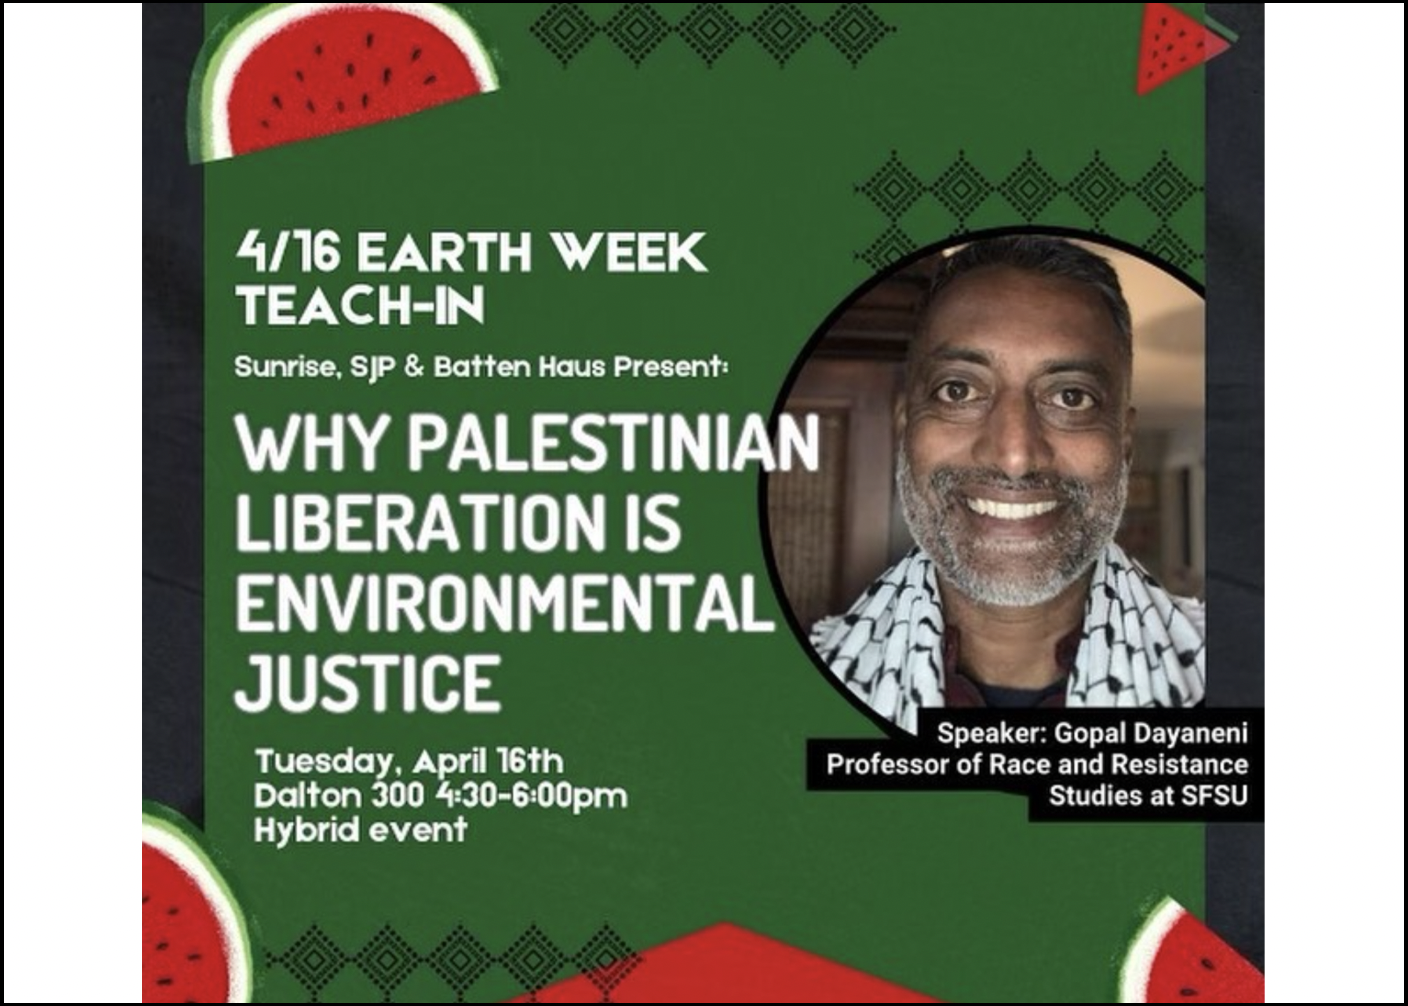 Bryn Mawr Students Host Teach in, Titled “Why Palestinian Liberation is Environmental Justice”